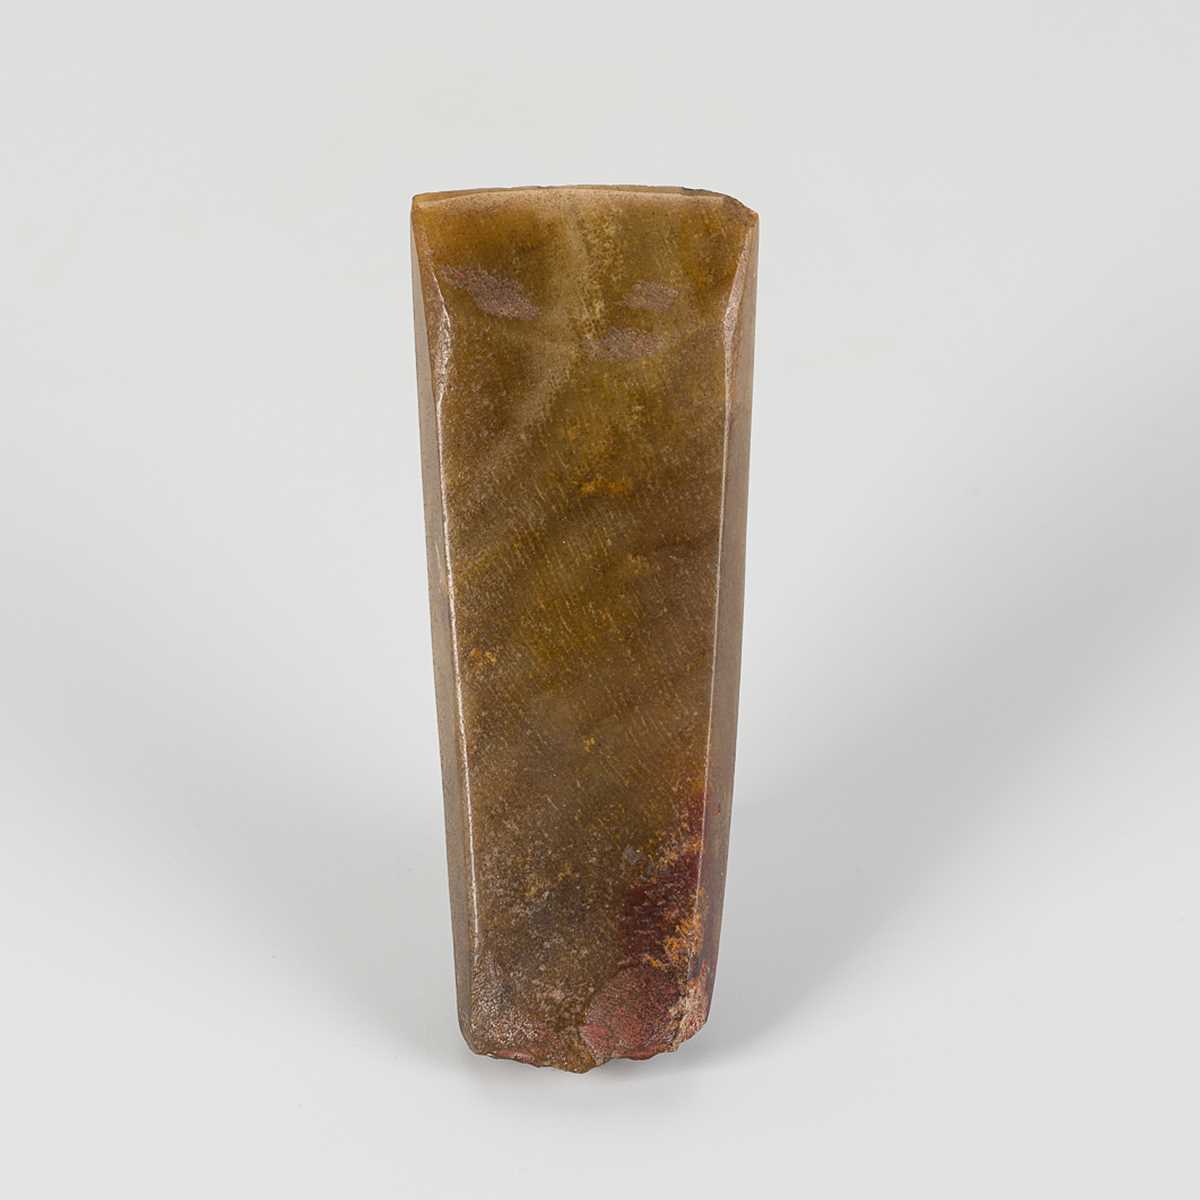 A SMALL JADE AXE FRAGMENT, NEOLITHIC PERIOD